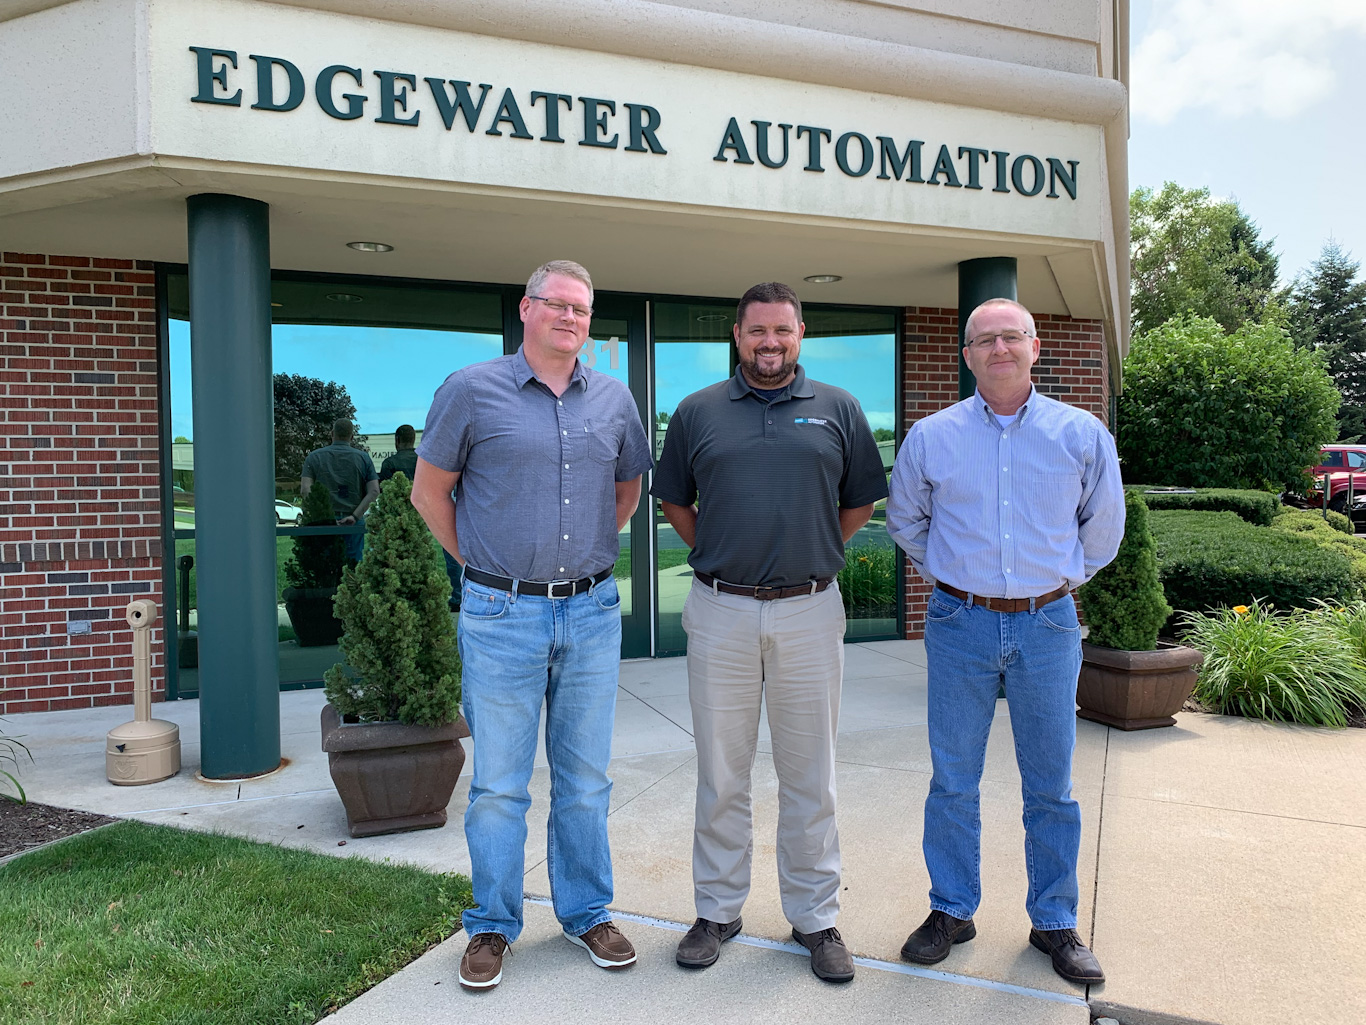 New Roles Announced For Longtime Employees at Edgewater Automation